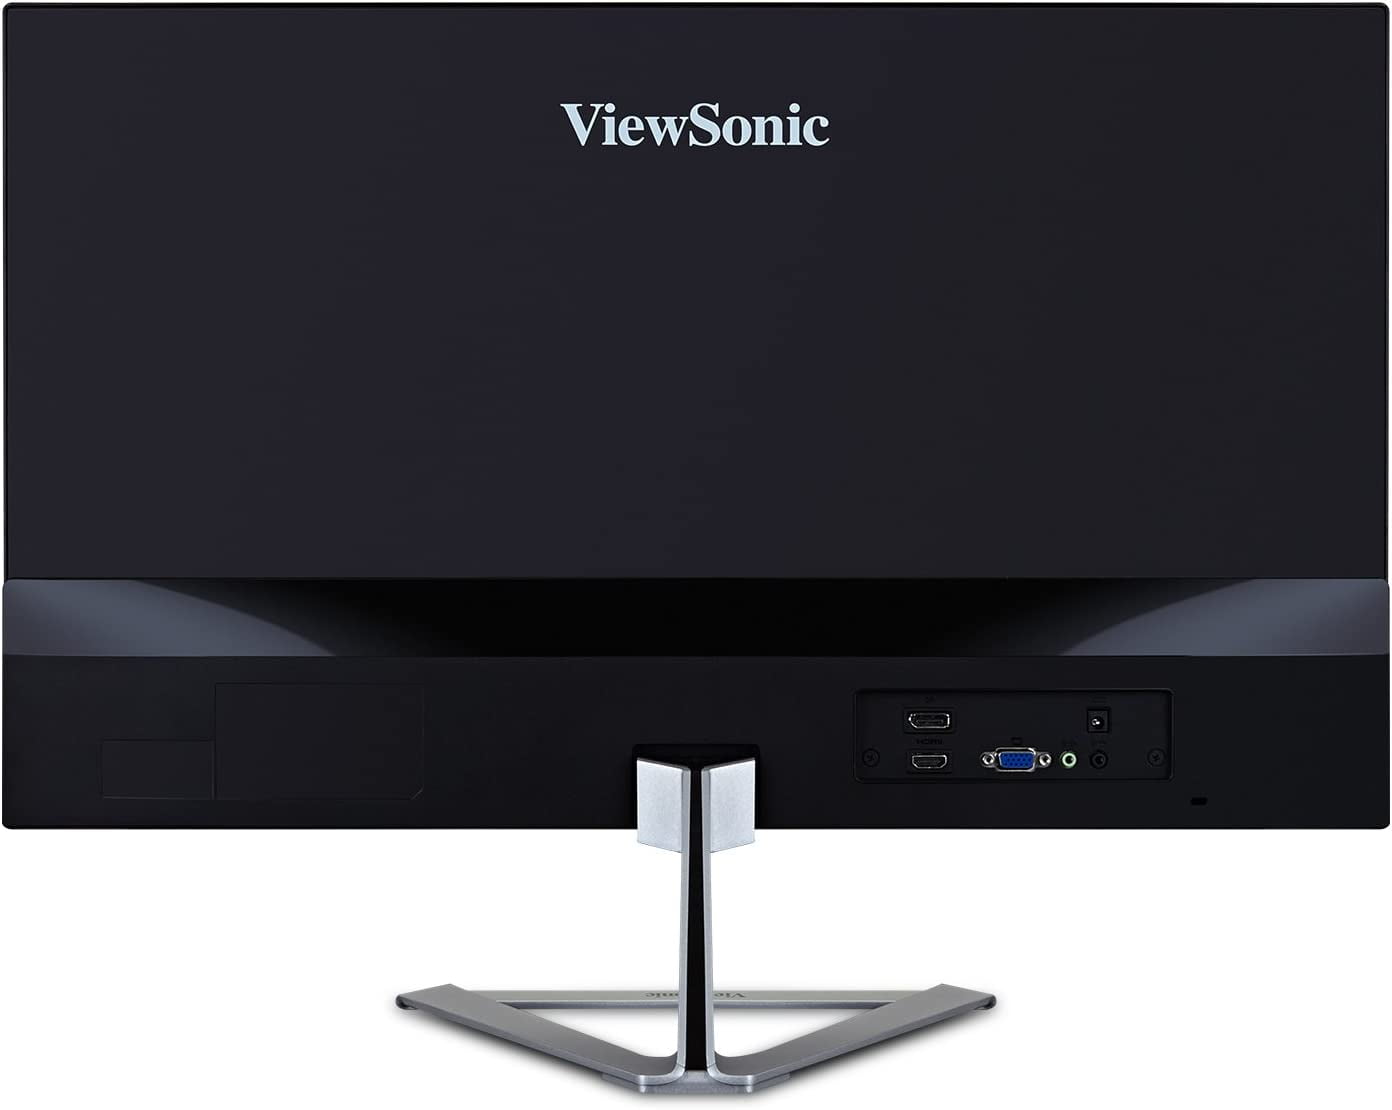 ViewSonic 32 Inch 1080p Widescreen IPS Monitor with Ultra-Thin